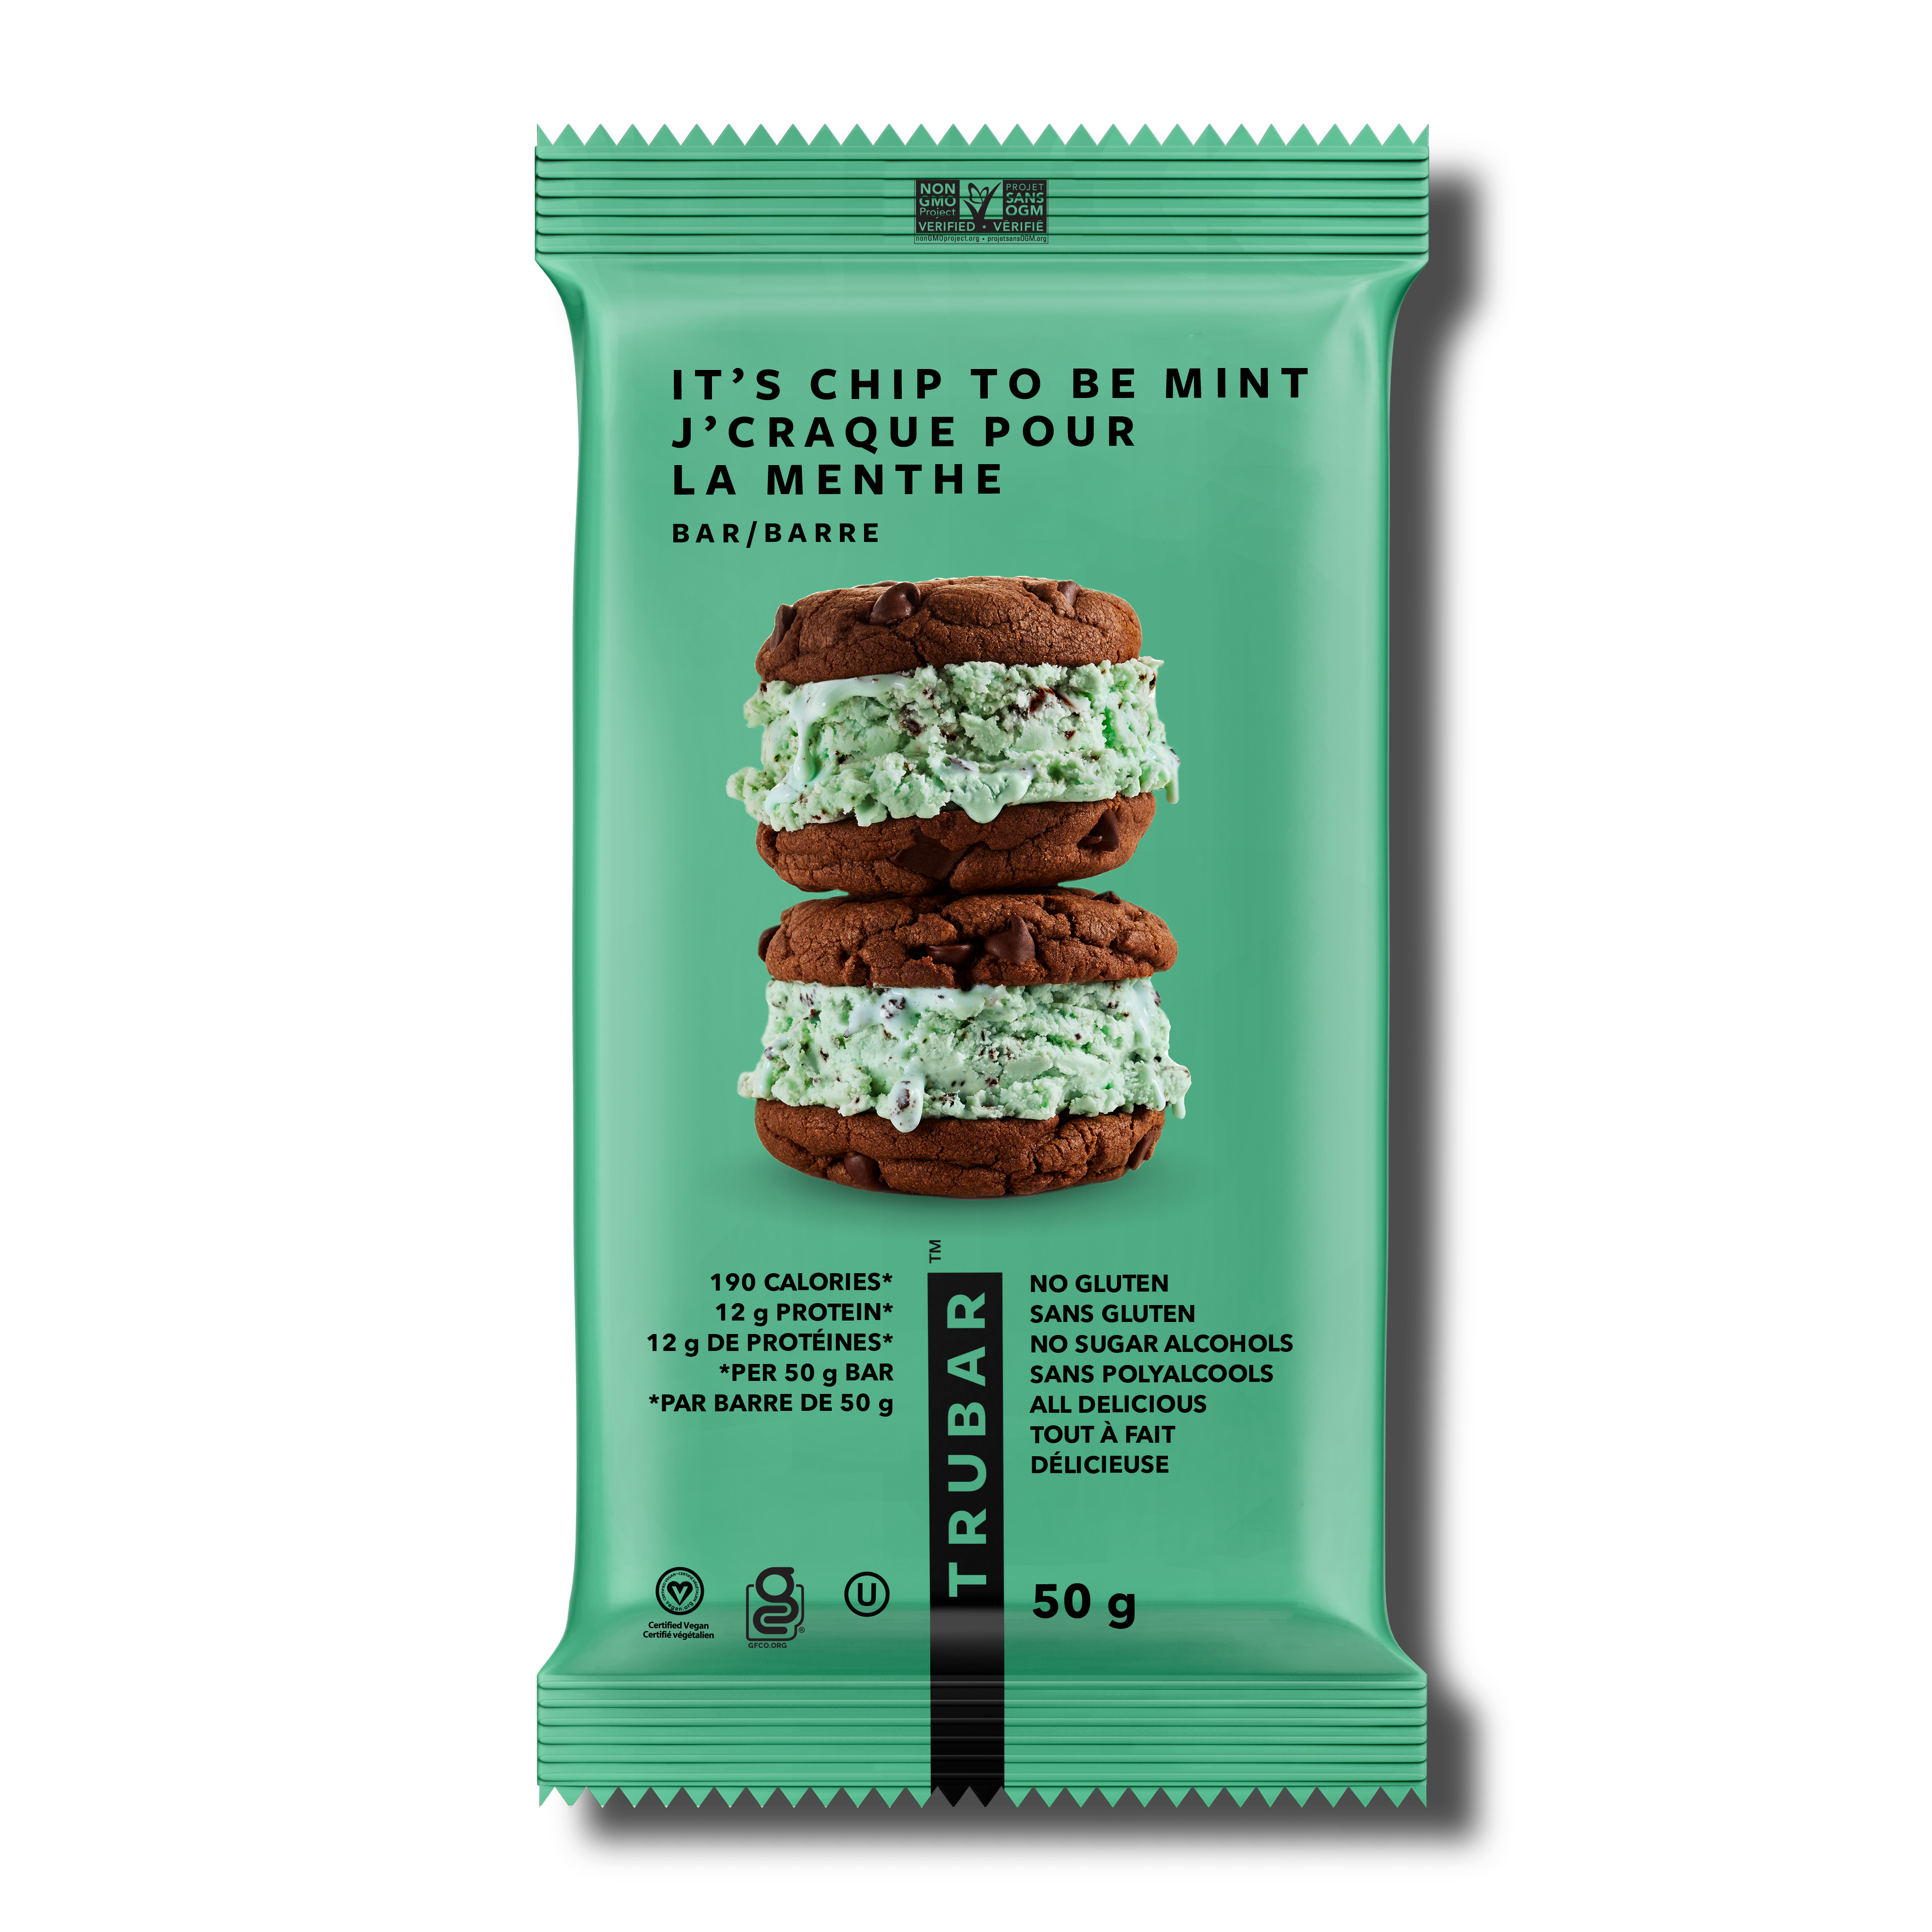 It's Mint to Be Chip - Canada